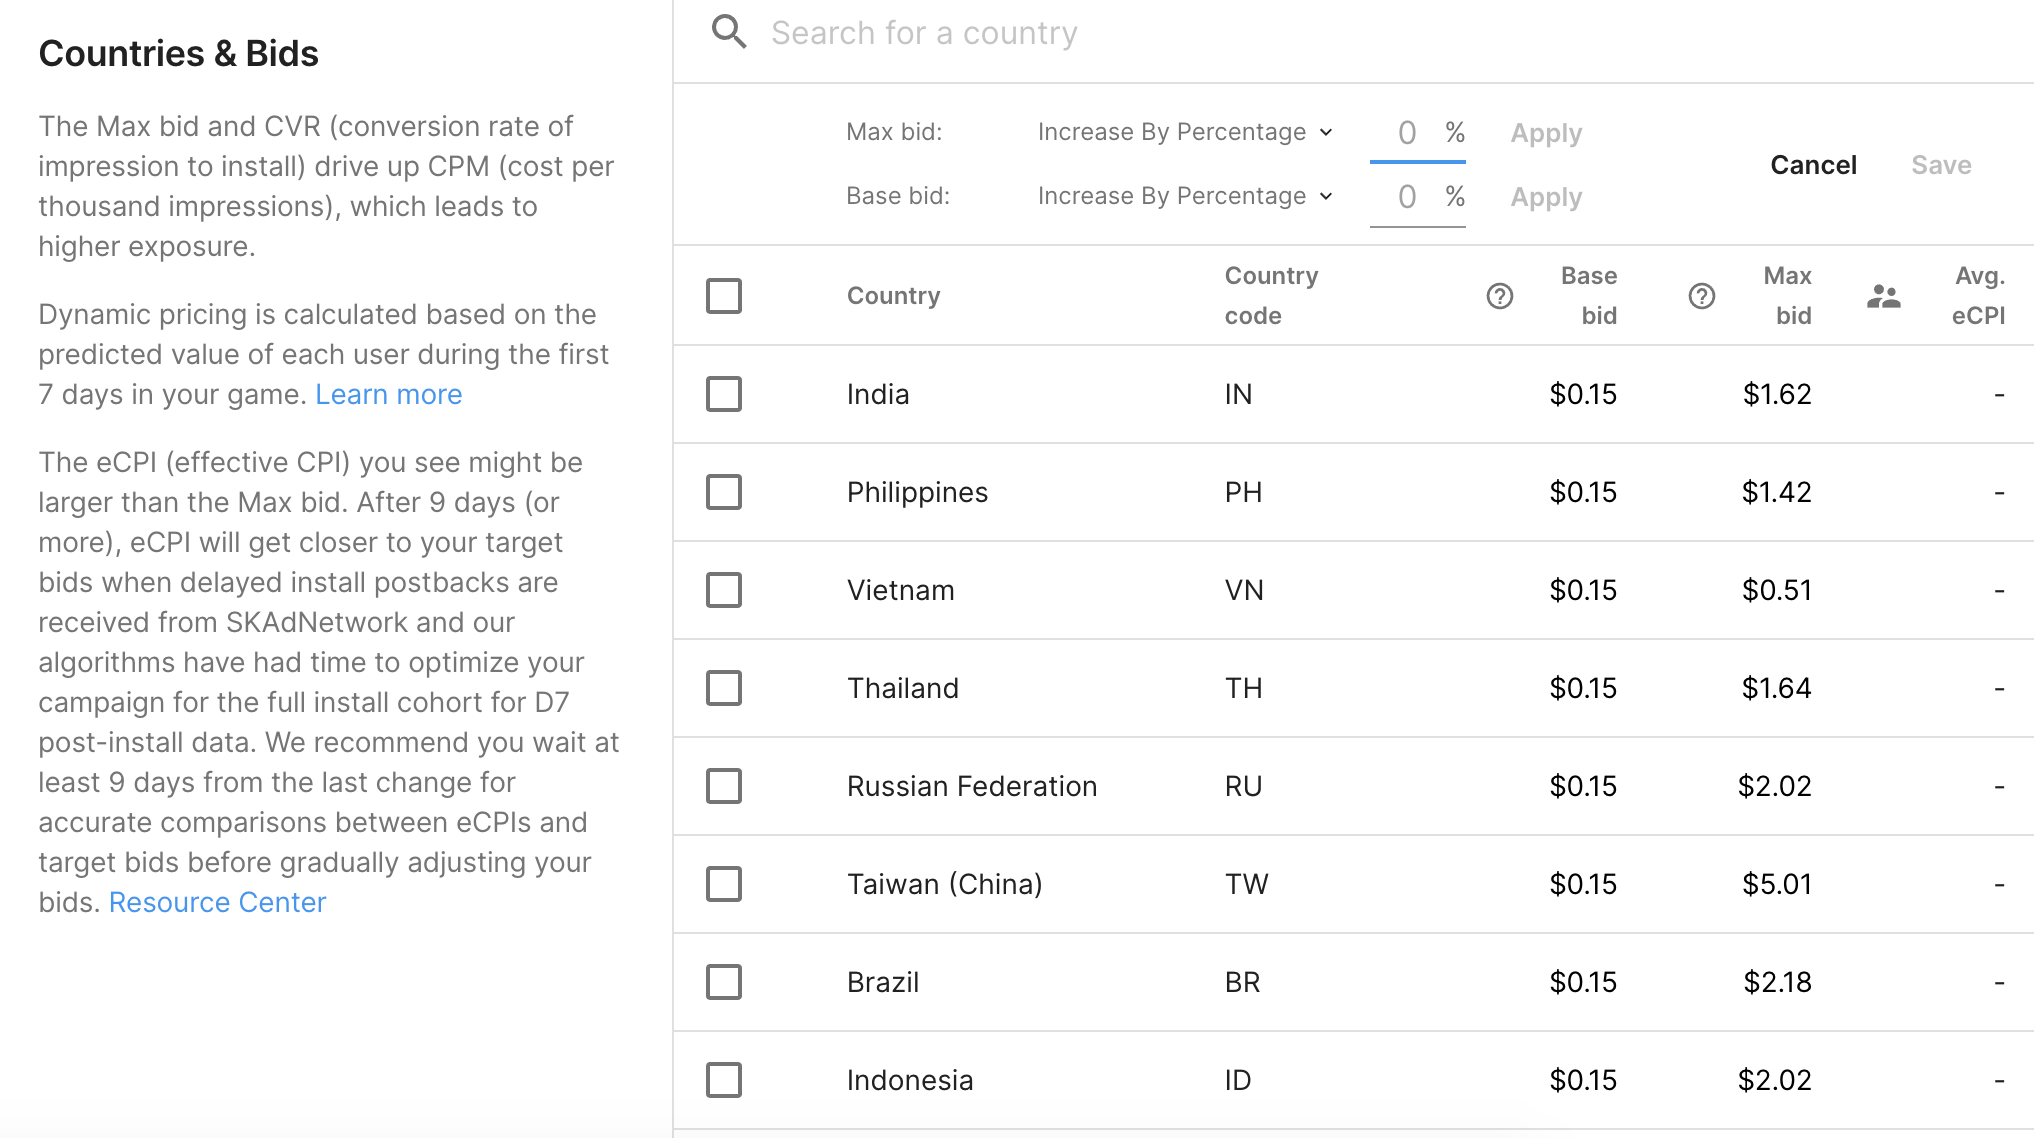 Countries and bids for retention campaigns edit values